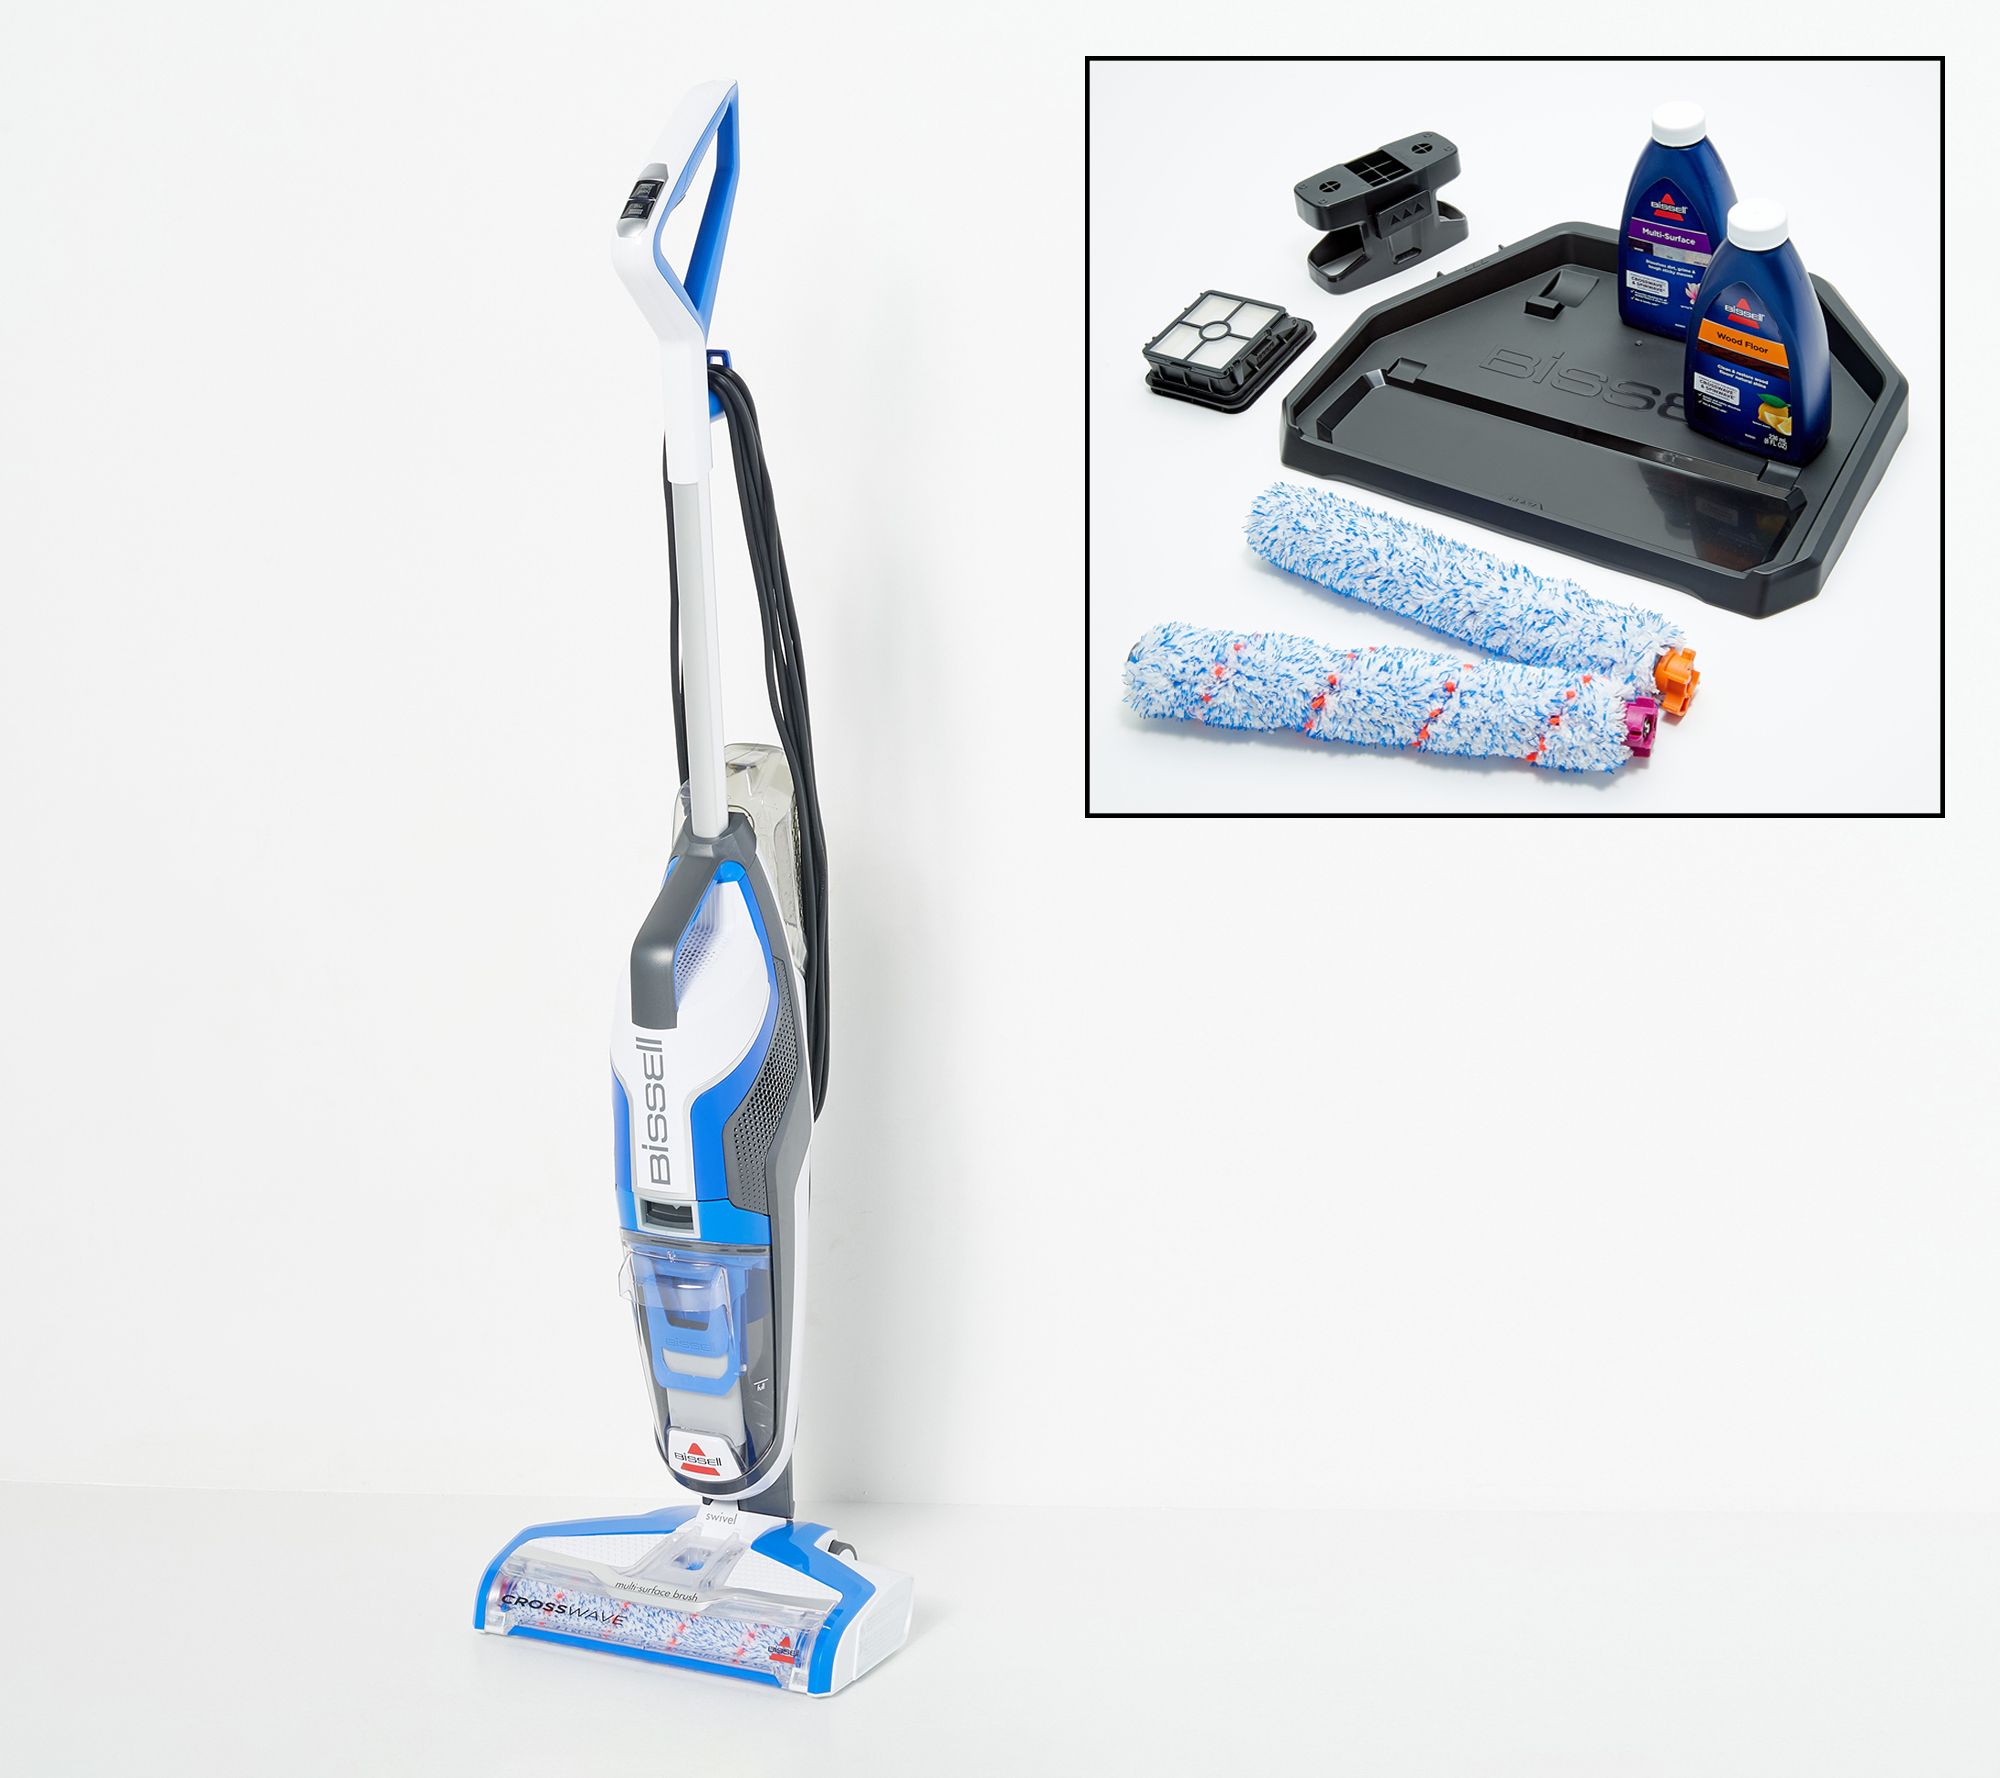 Bissell Crosswave Multi Surface Cleaner Demonstration & Review 